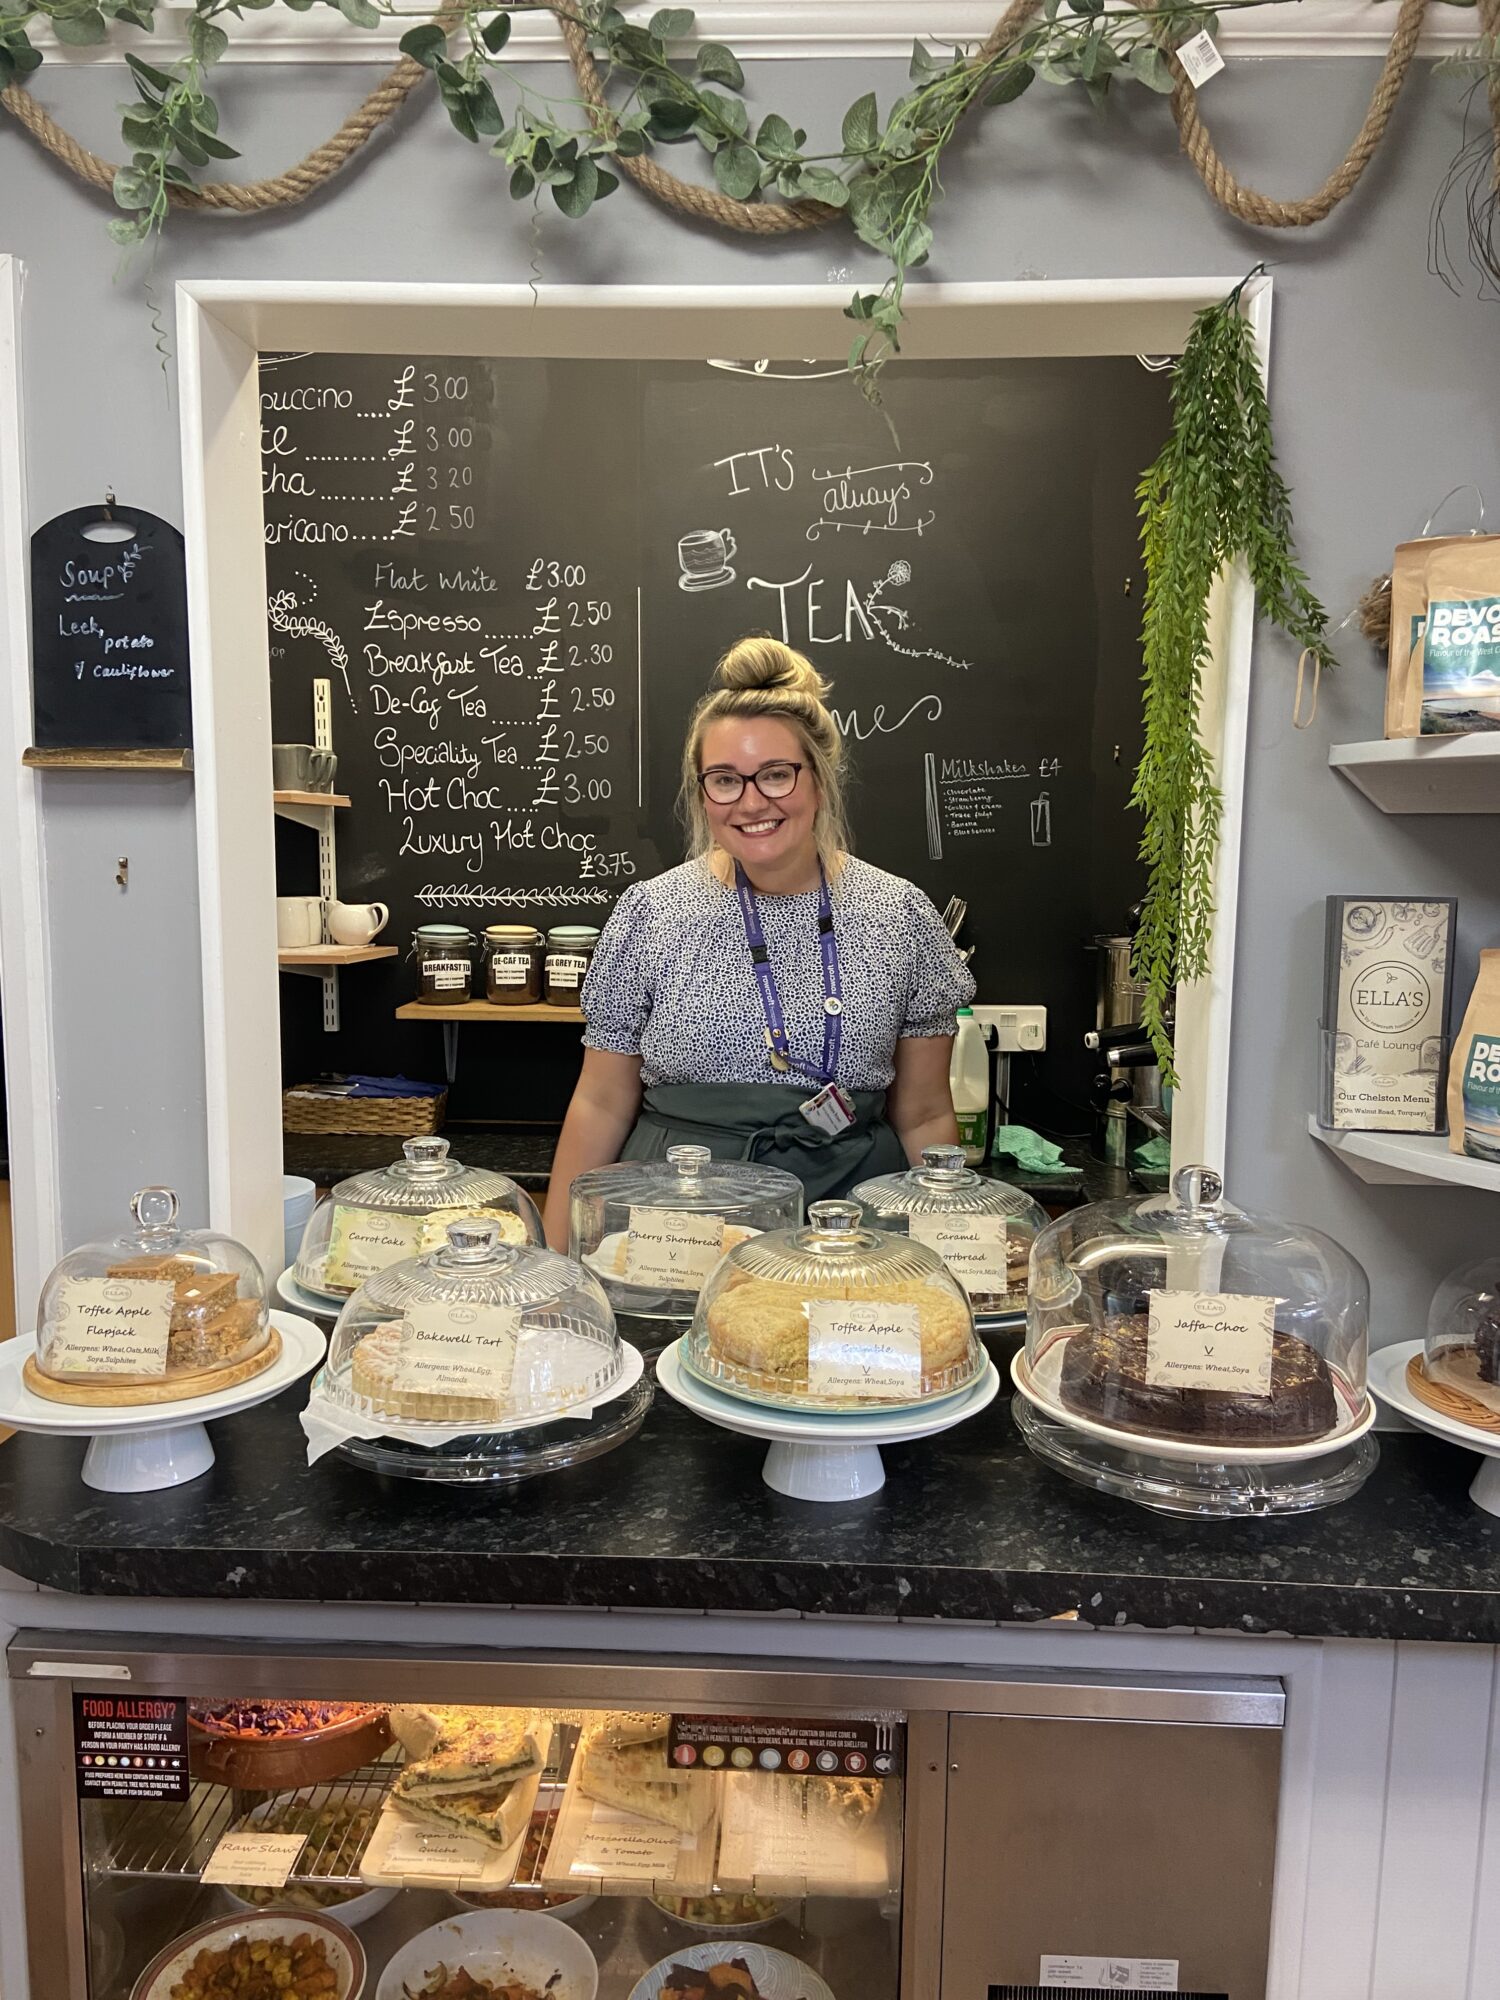 Chelsea smiles in front of a selection of cakes available at Ella's café.